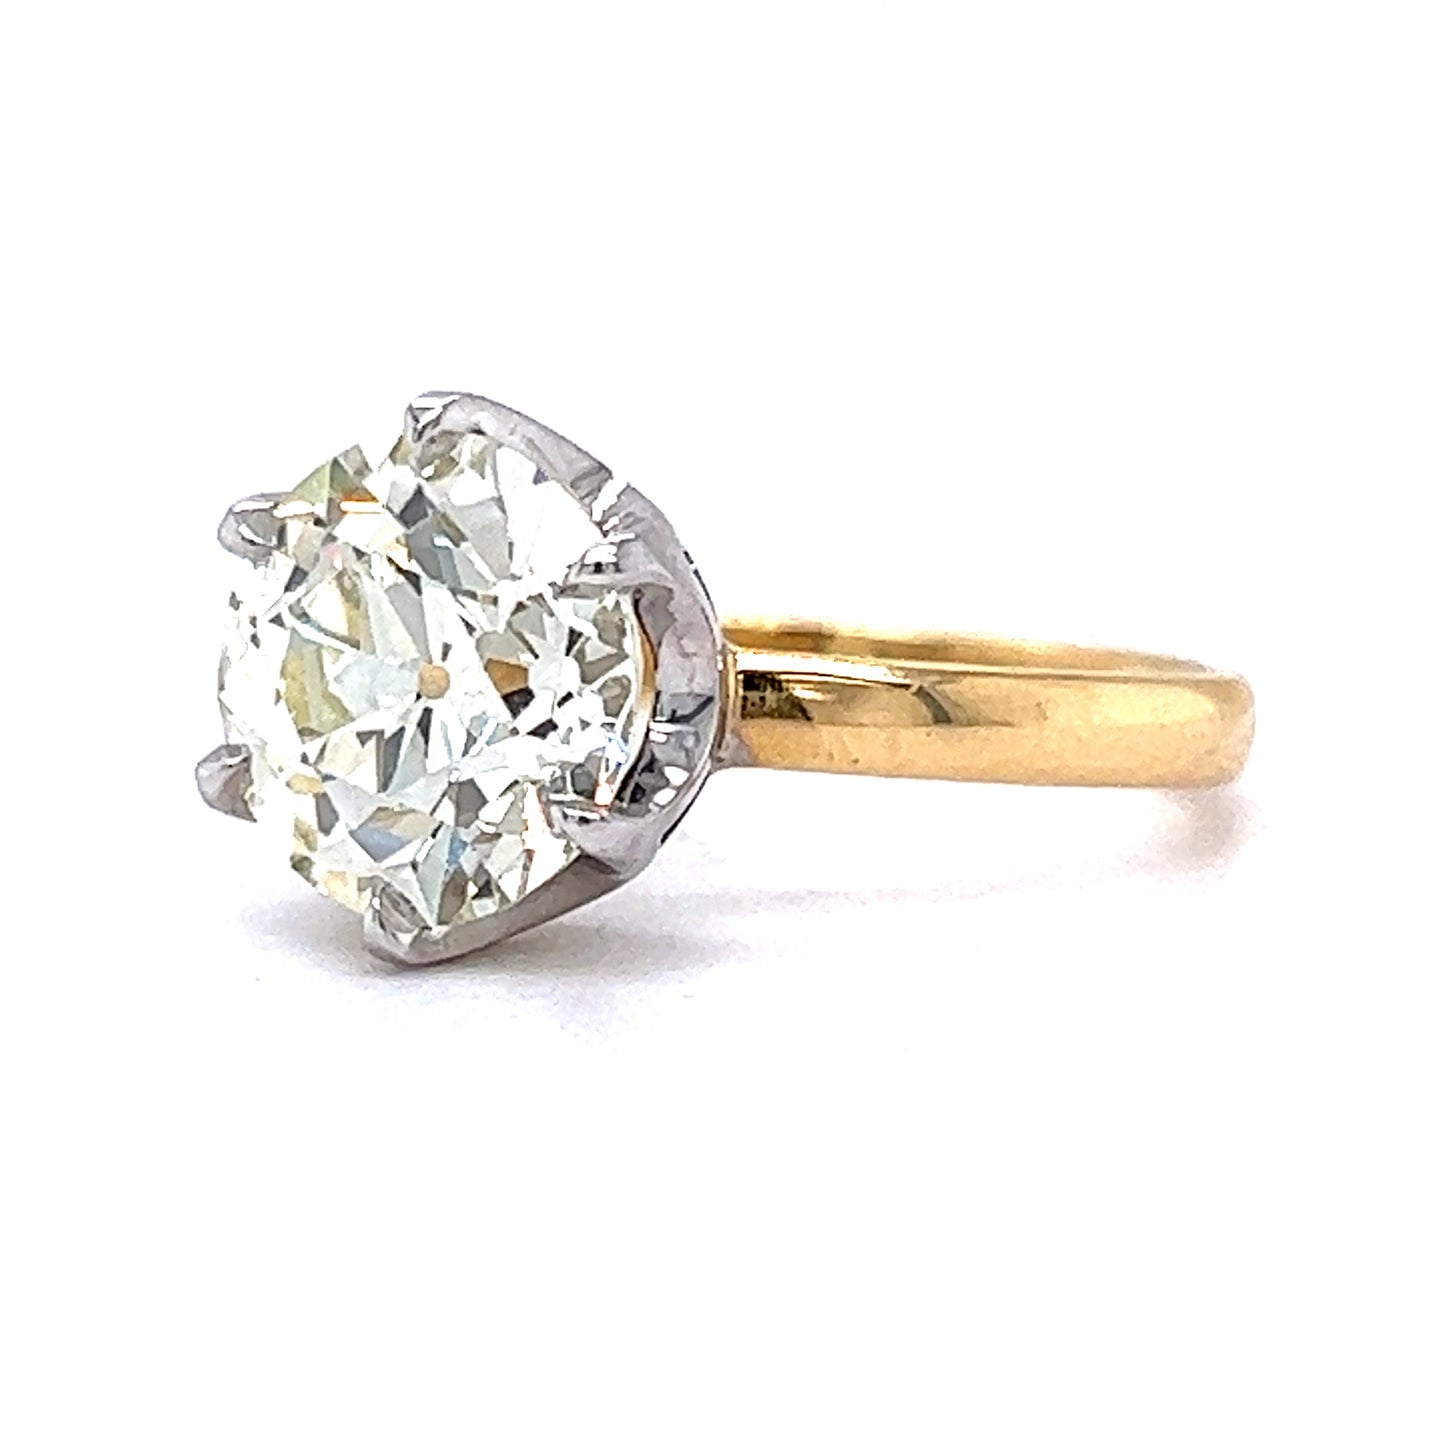 3.17 Old European Cut Solitaire Engagement Ring in 14k Yellow Gold